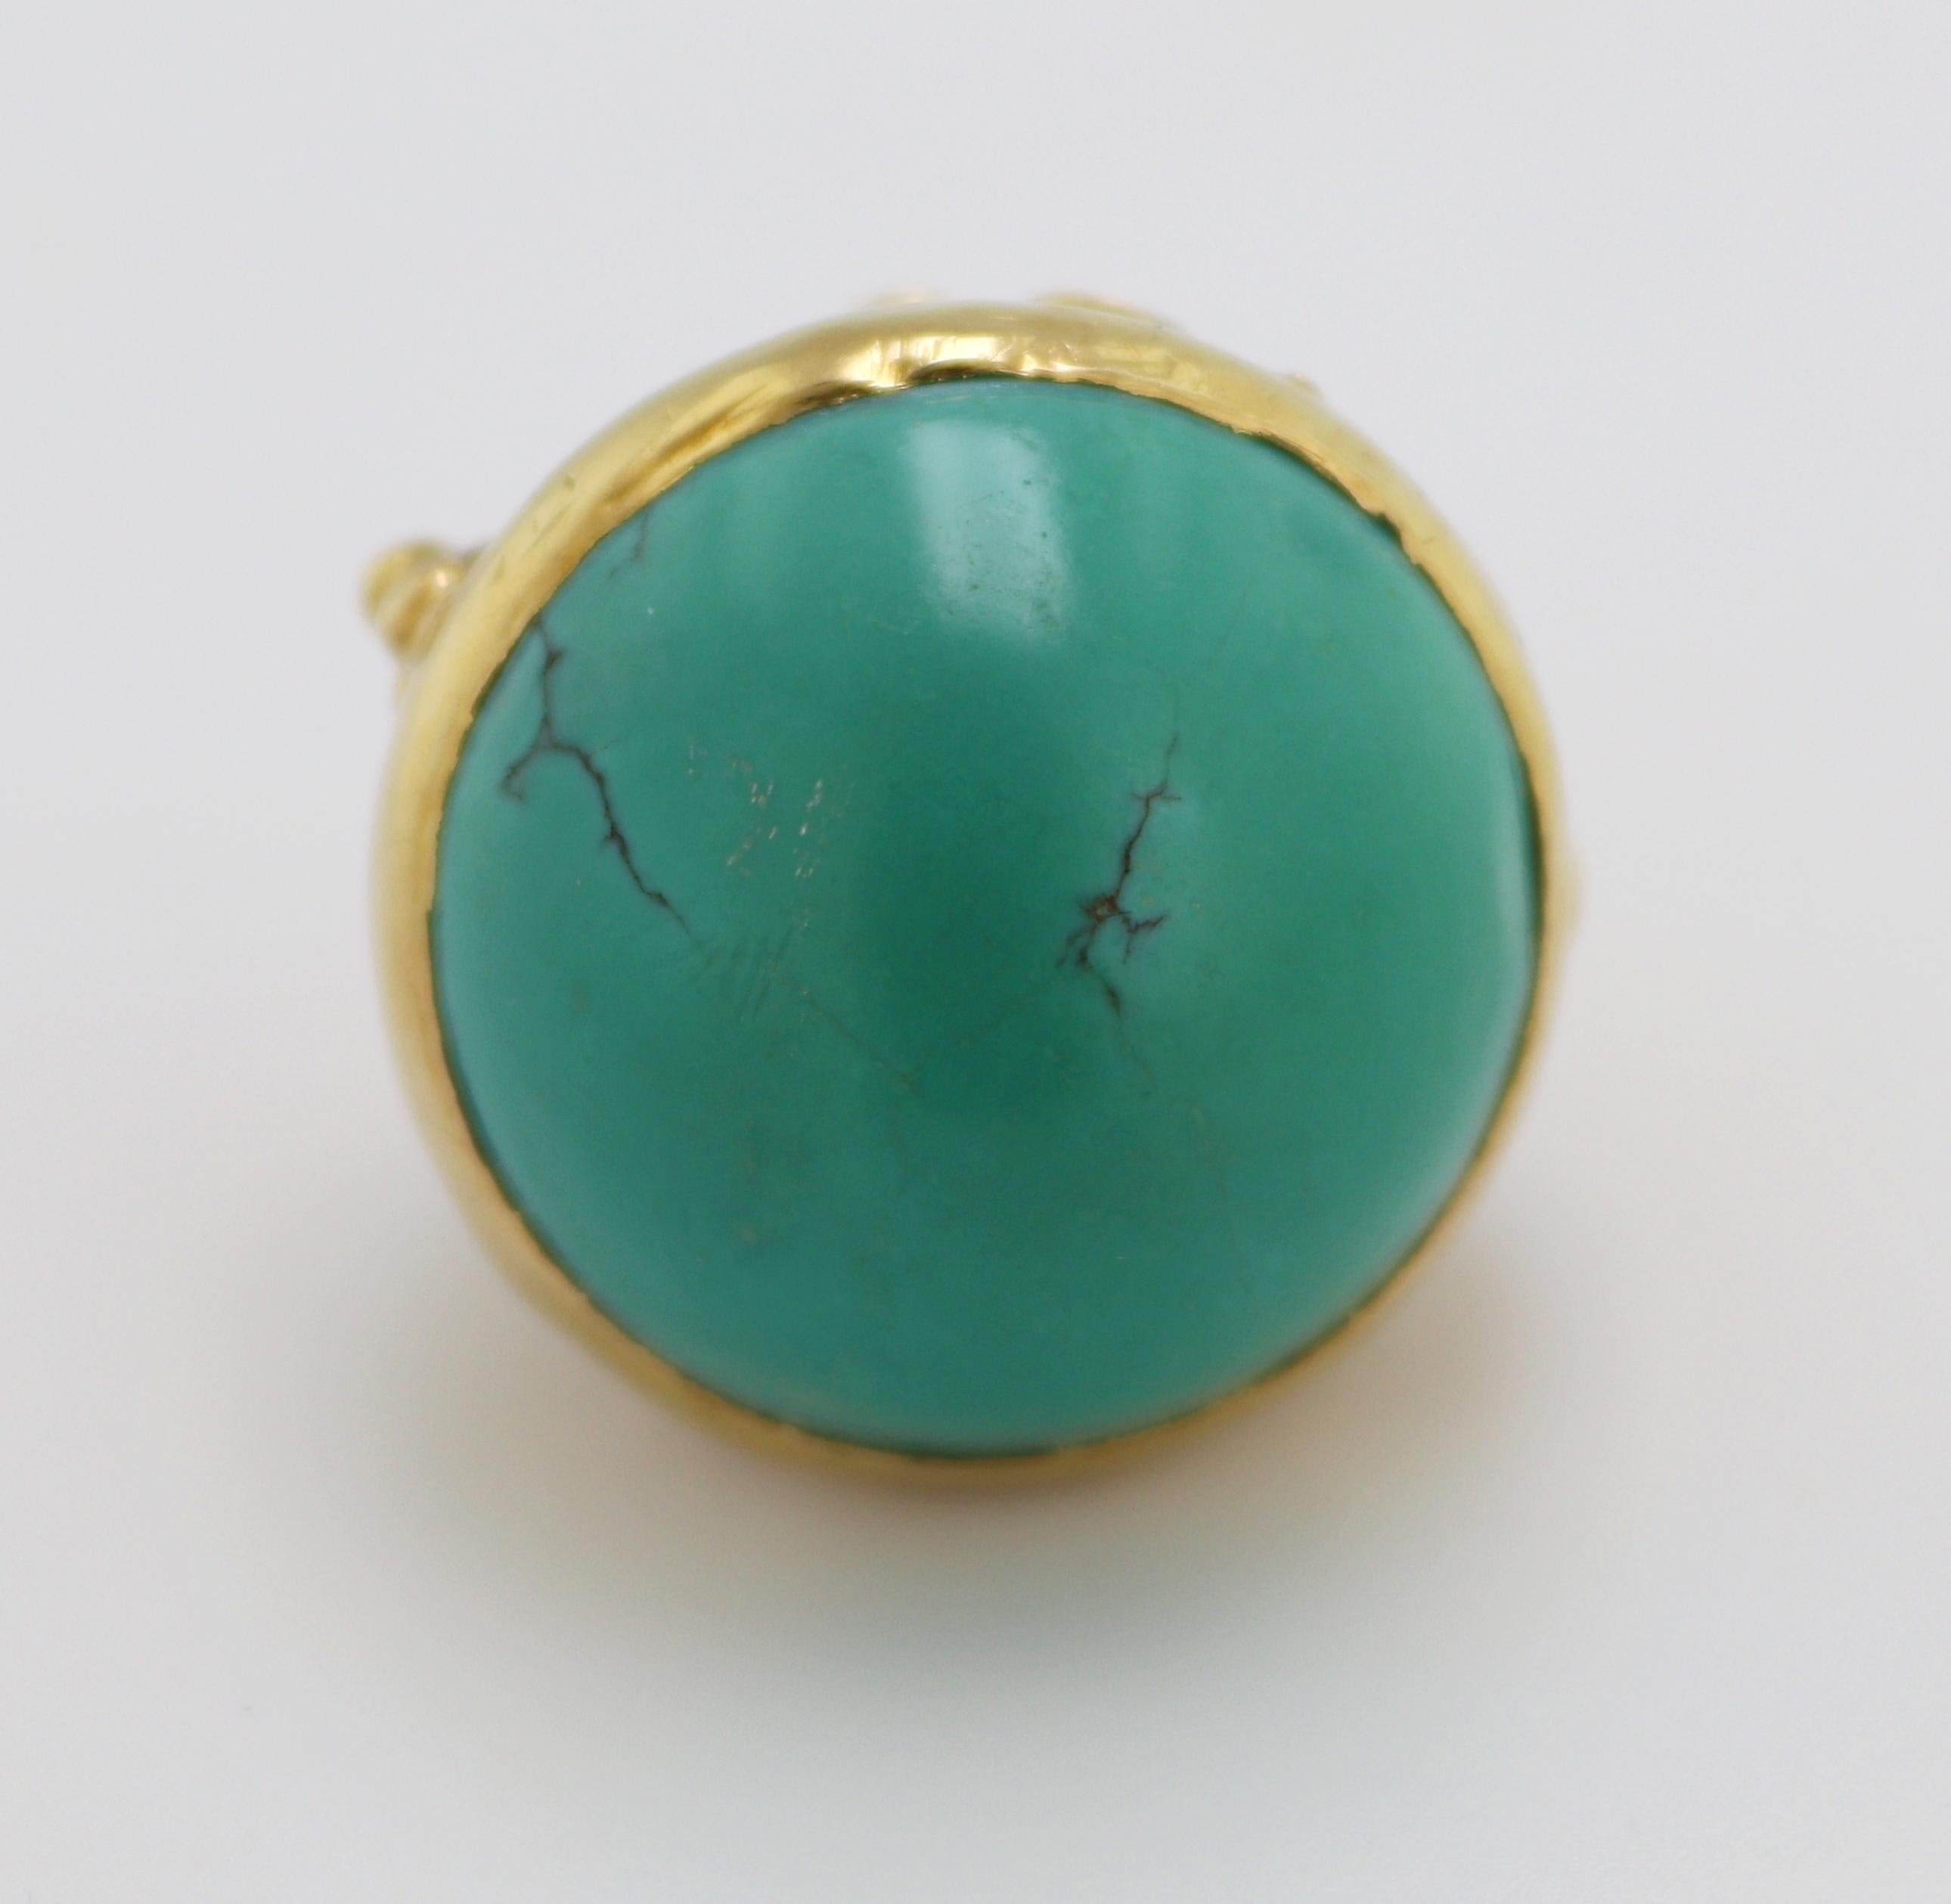 Artisan Vintage Turquoise, 18k Yellow Gold Fob Pendant For Sale